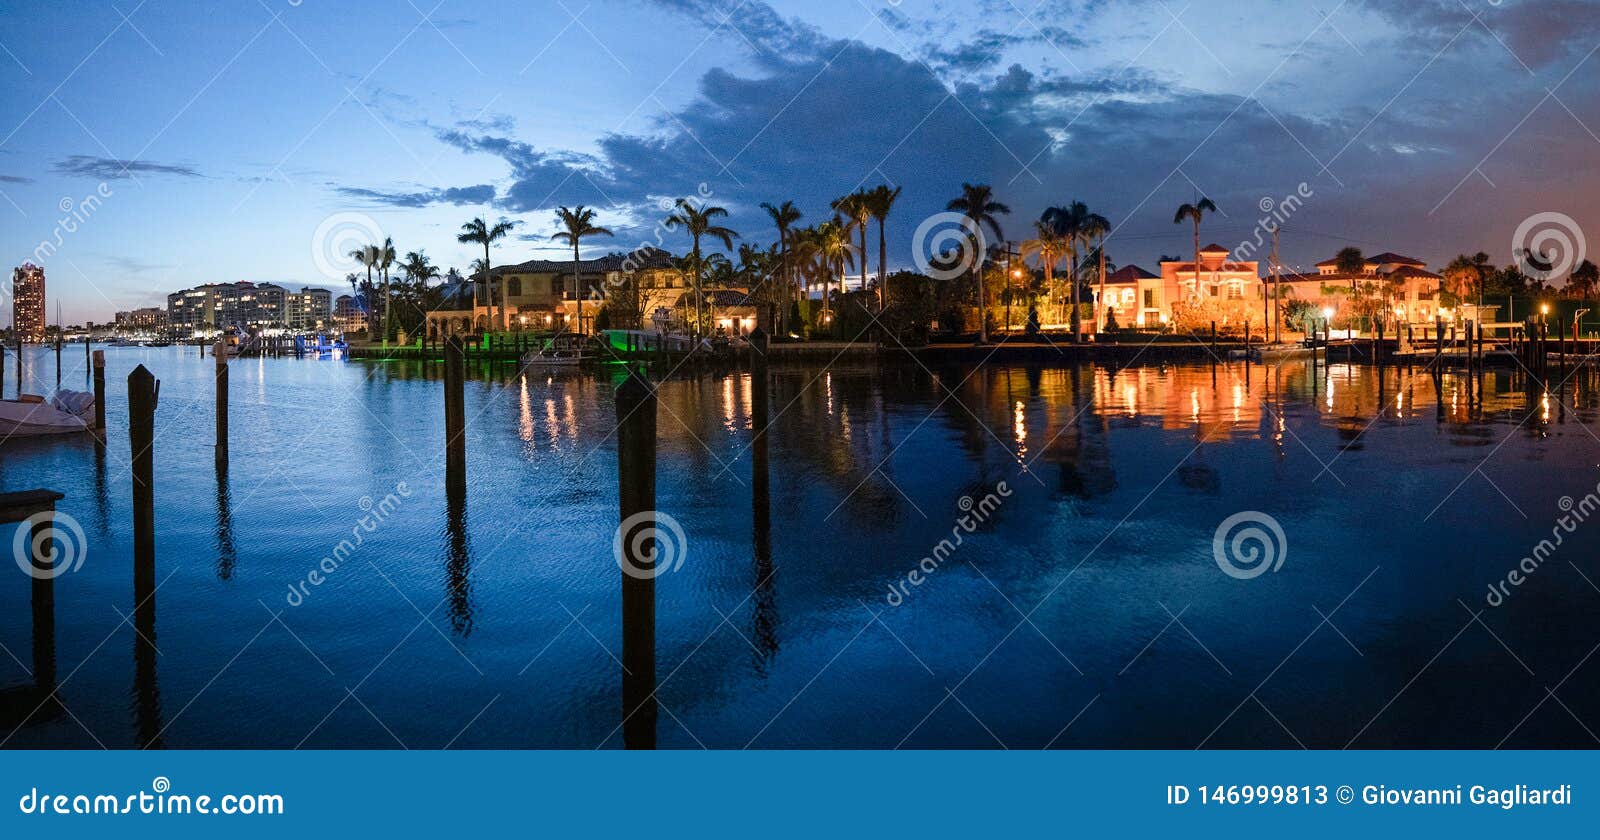 lake boca raton and city skyline with reflections at sunset, panoramic view